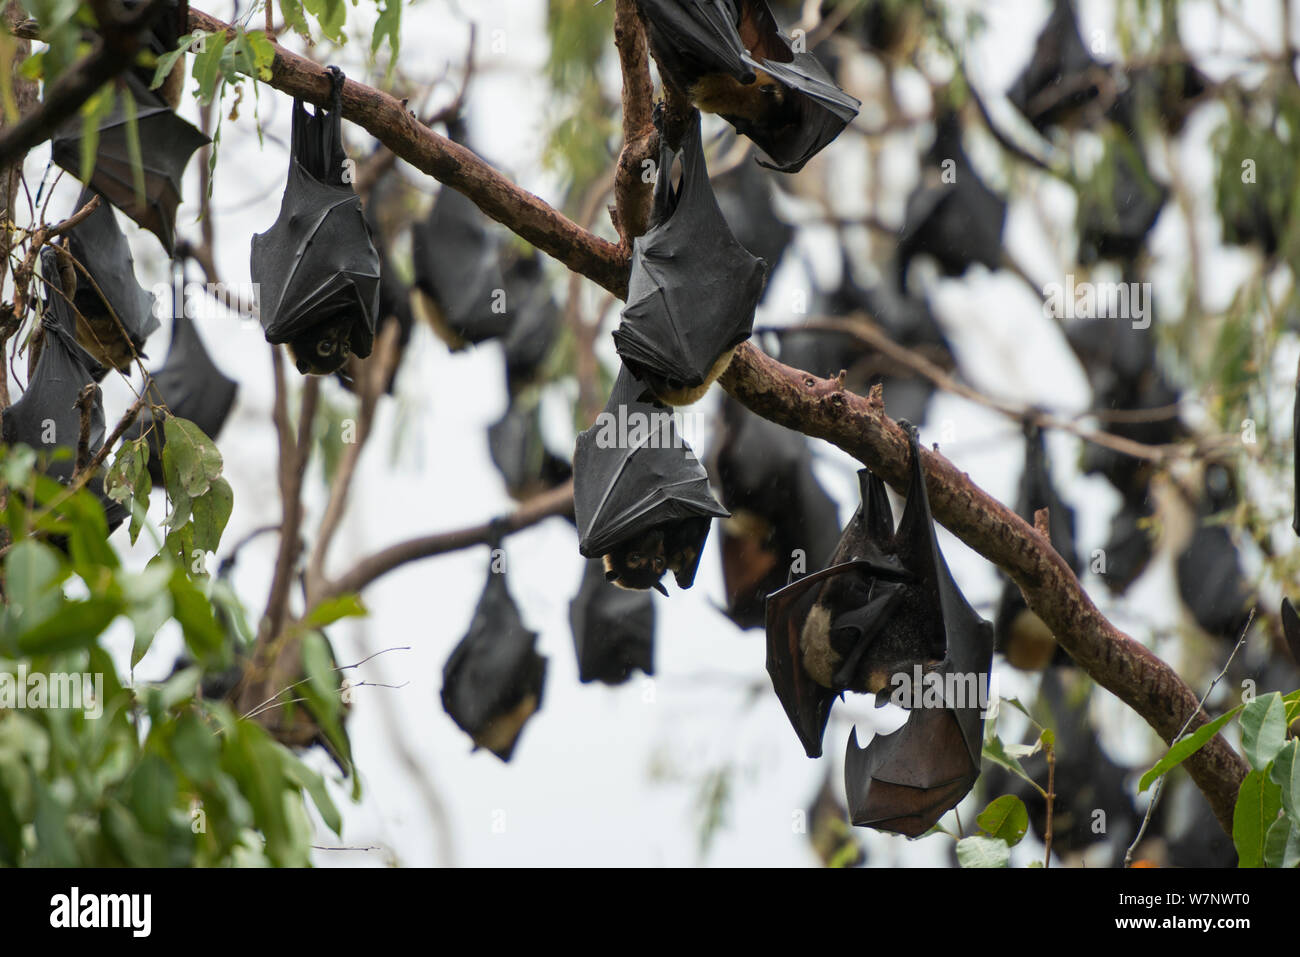 Spectacled flying fox (Pteropus conspicillatus) colony roosting during daytime, North Queensland, Australia, October 2012 Stock Photo